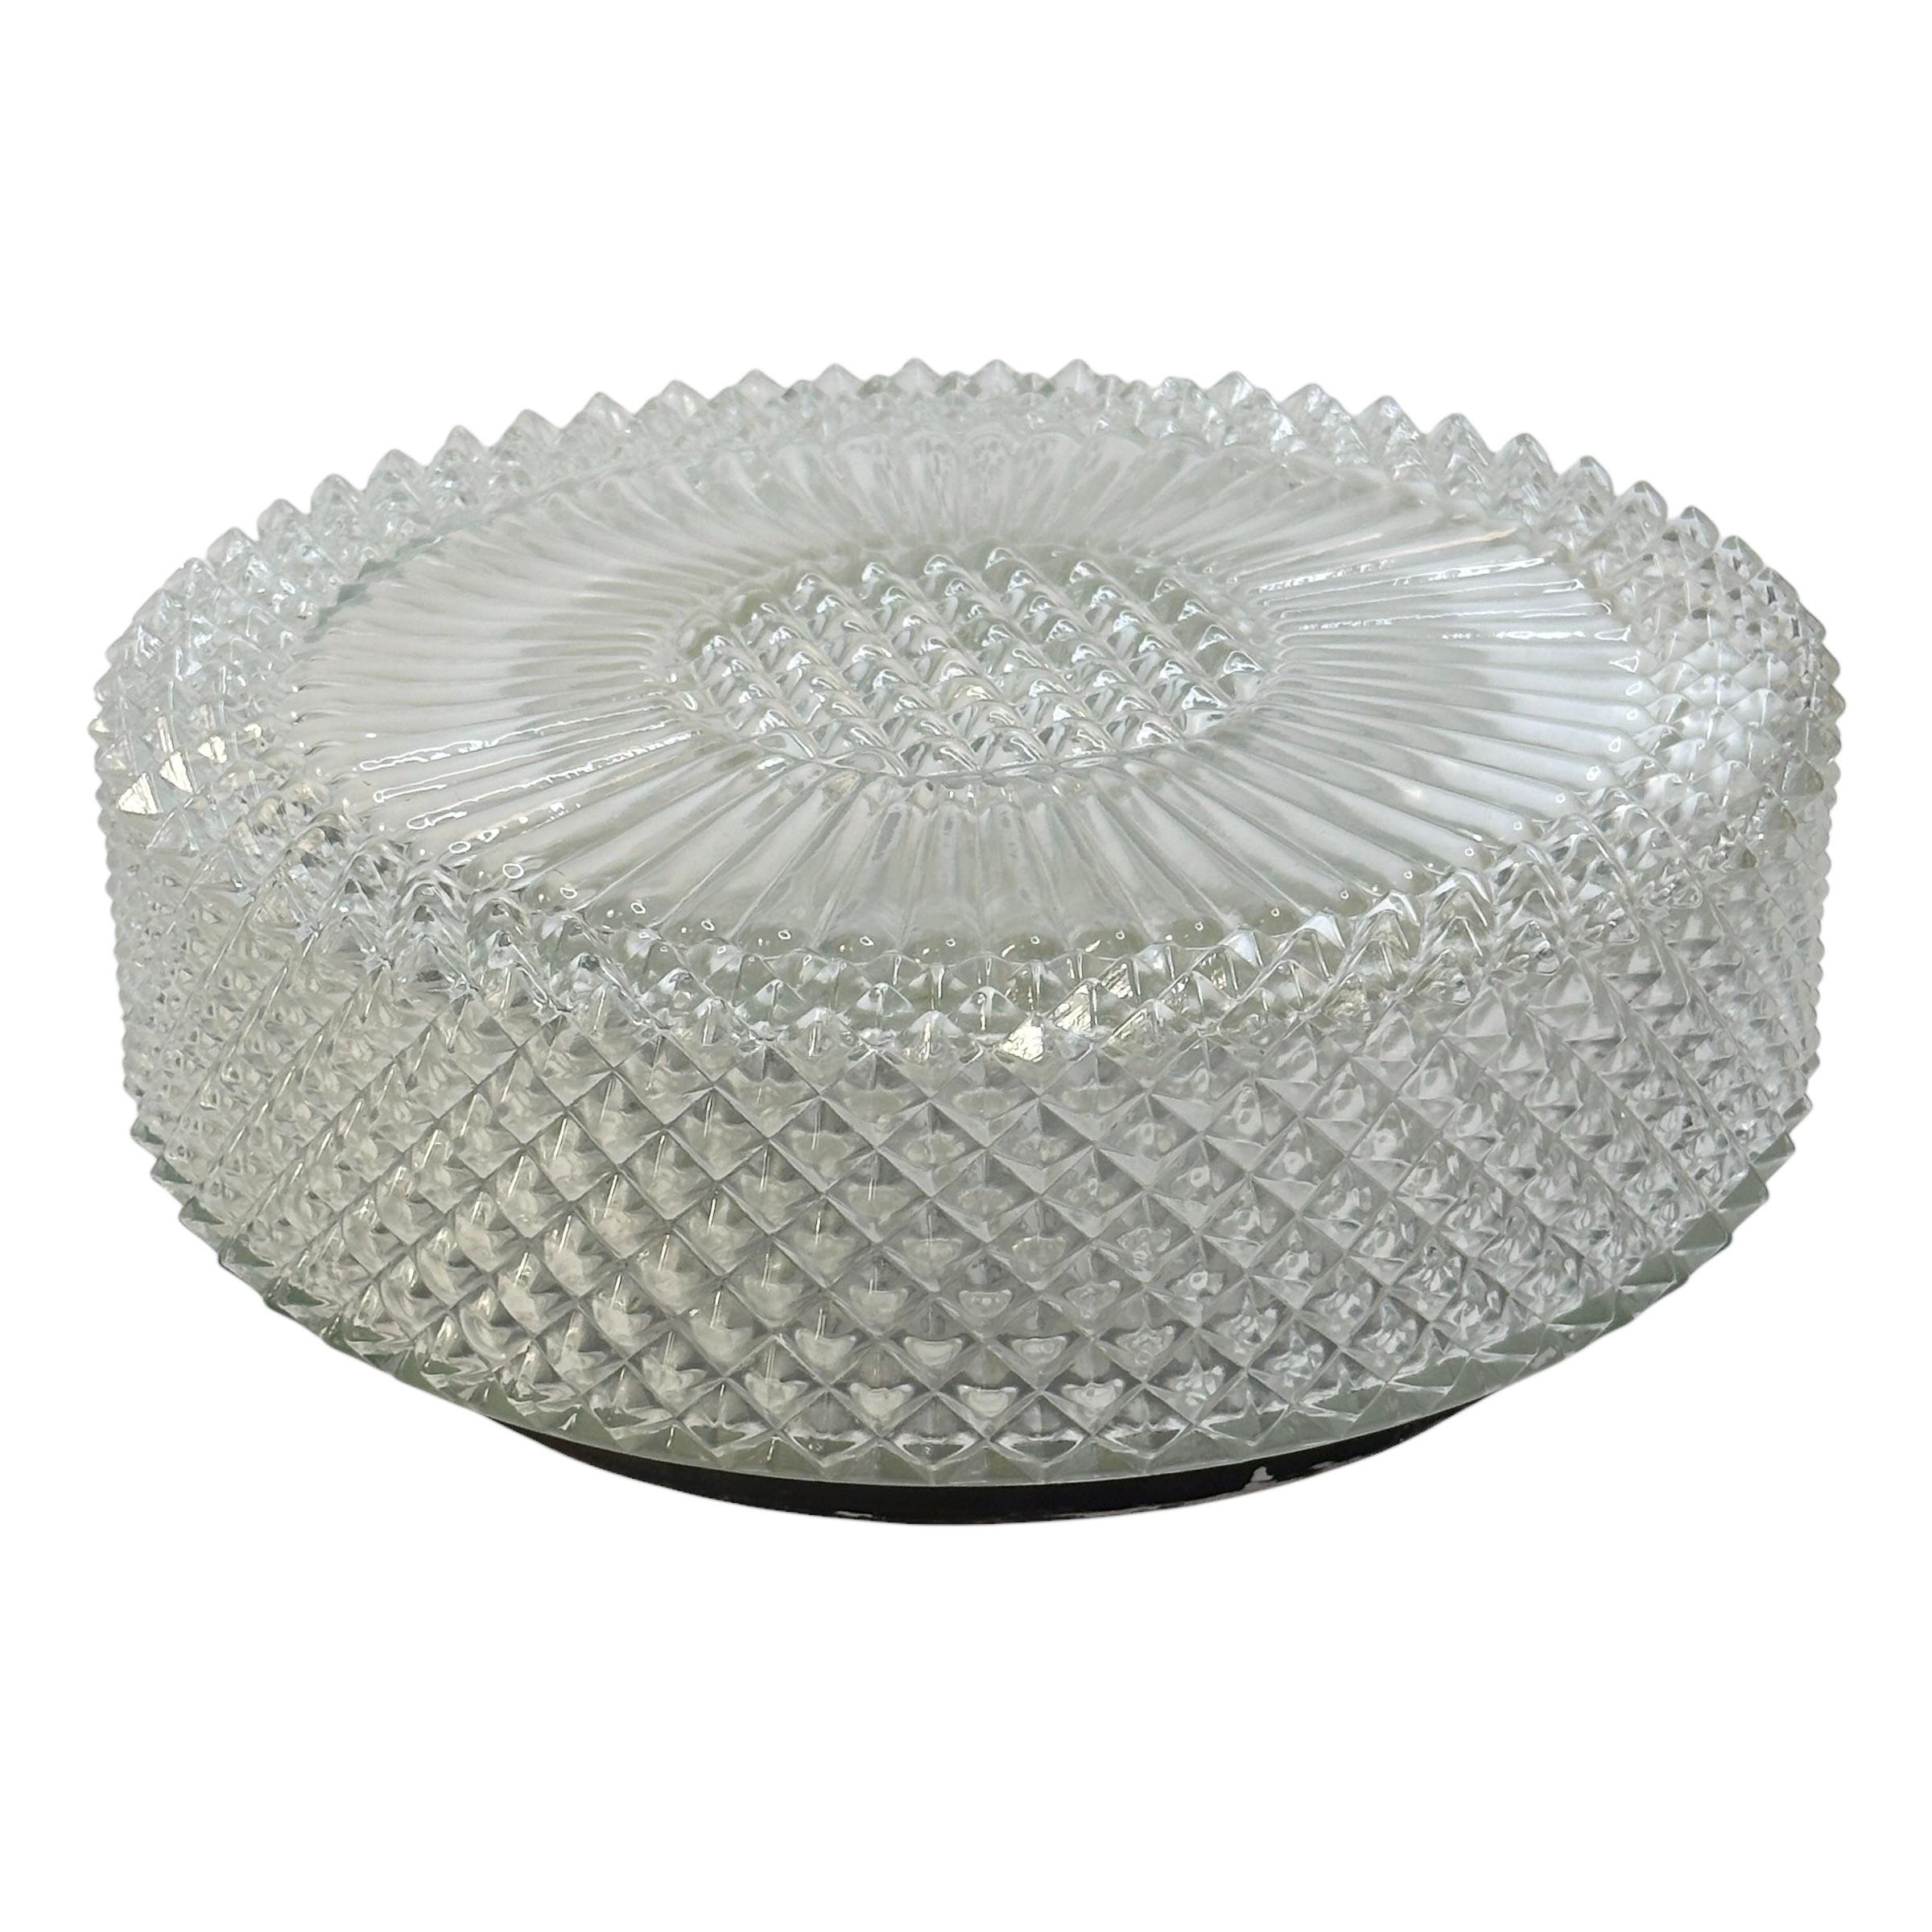 A beautiful flush mount ceiling light. Gorgeous textured glass flush mount with metal fixture. It has a very heavy glass with a crystal pattern design. The fixture requires two European E27 / 110 Volt Edison bulbs, up to 60 watts each bulb. A nice